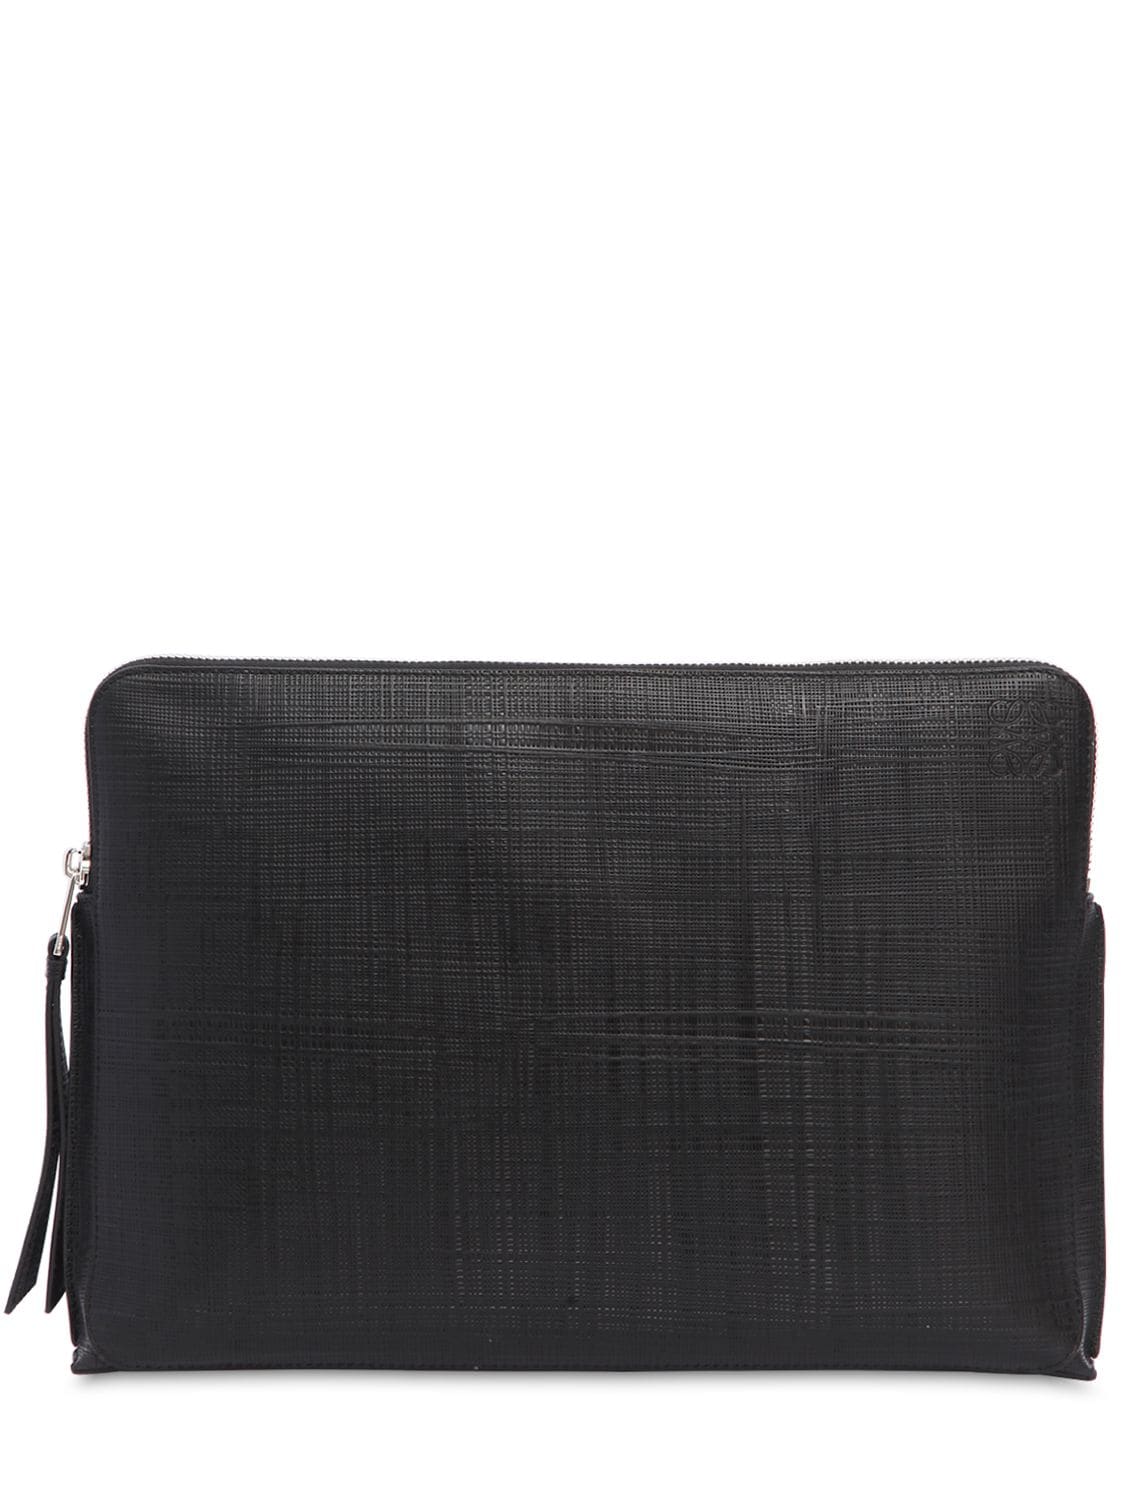 Loewe Goya Saffiano Leather Pouch In Black